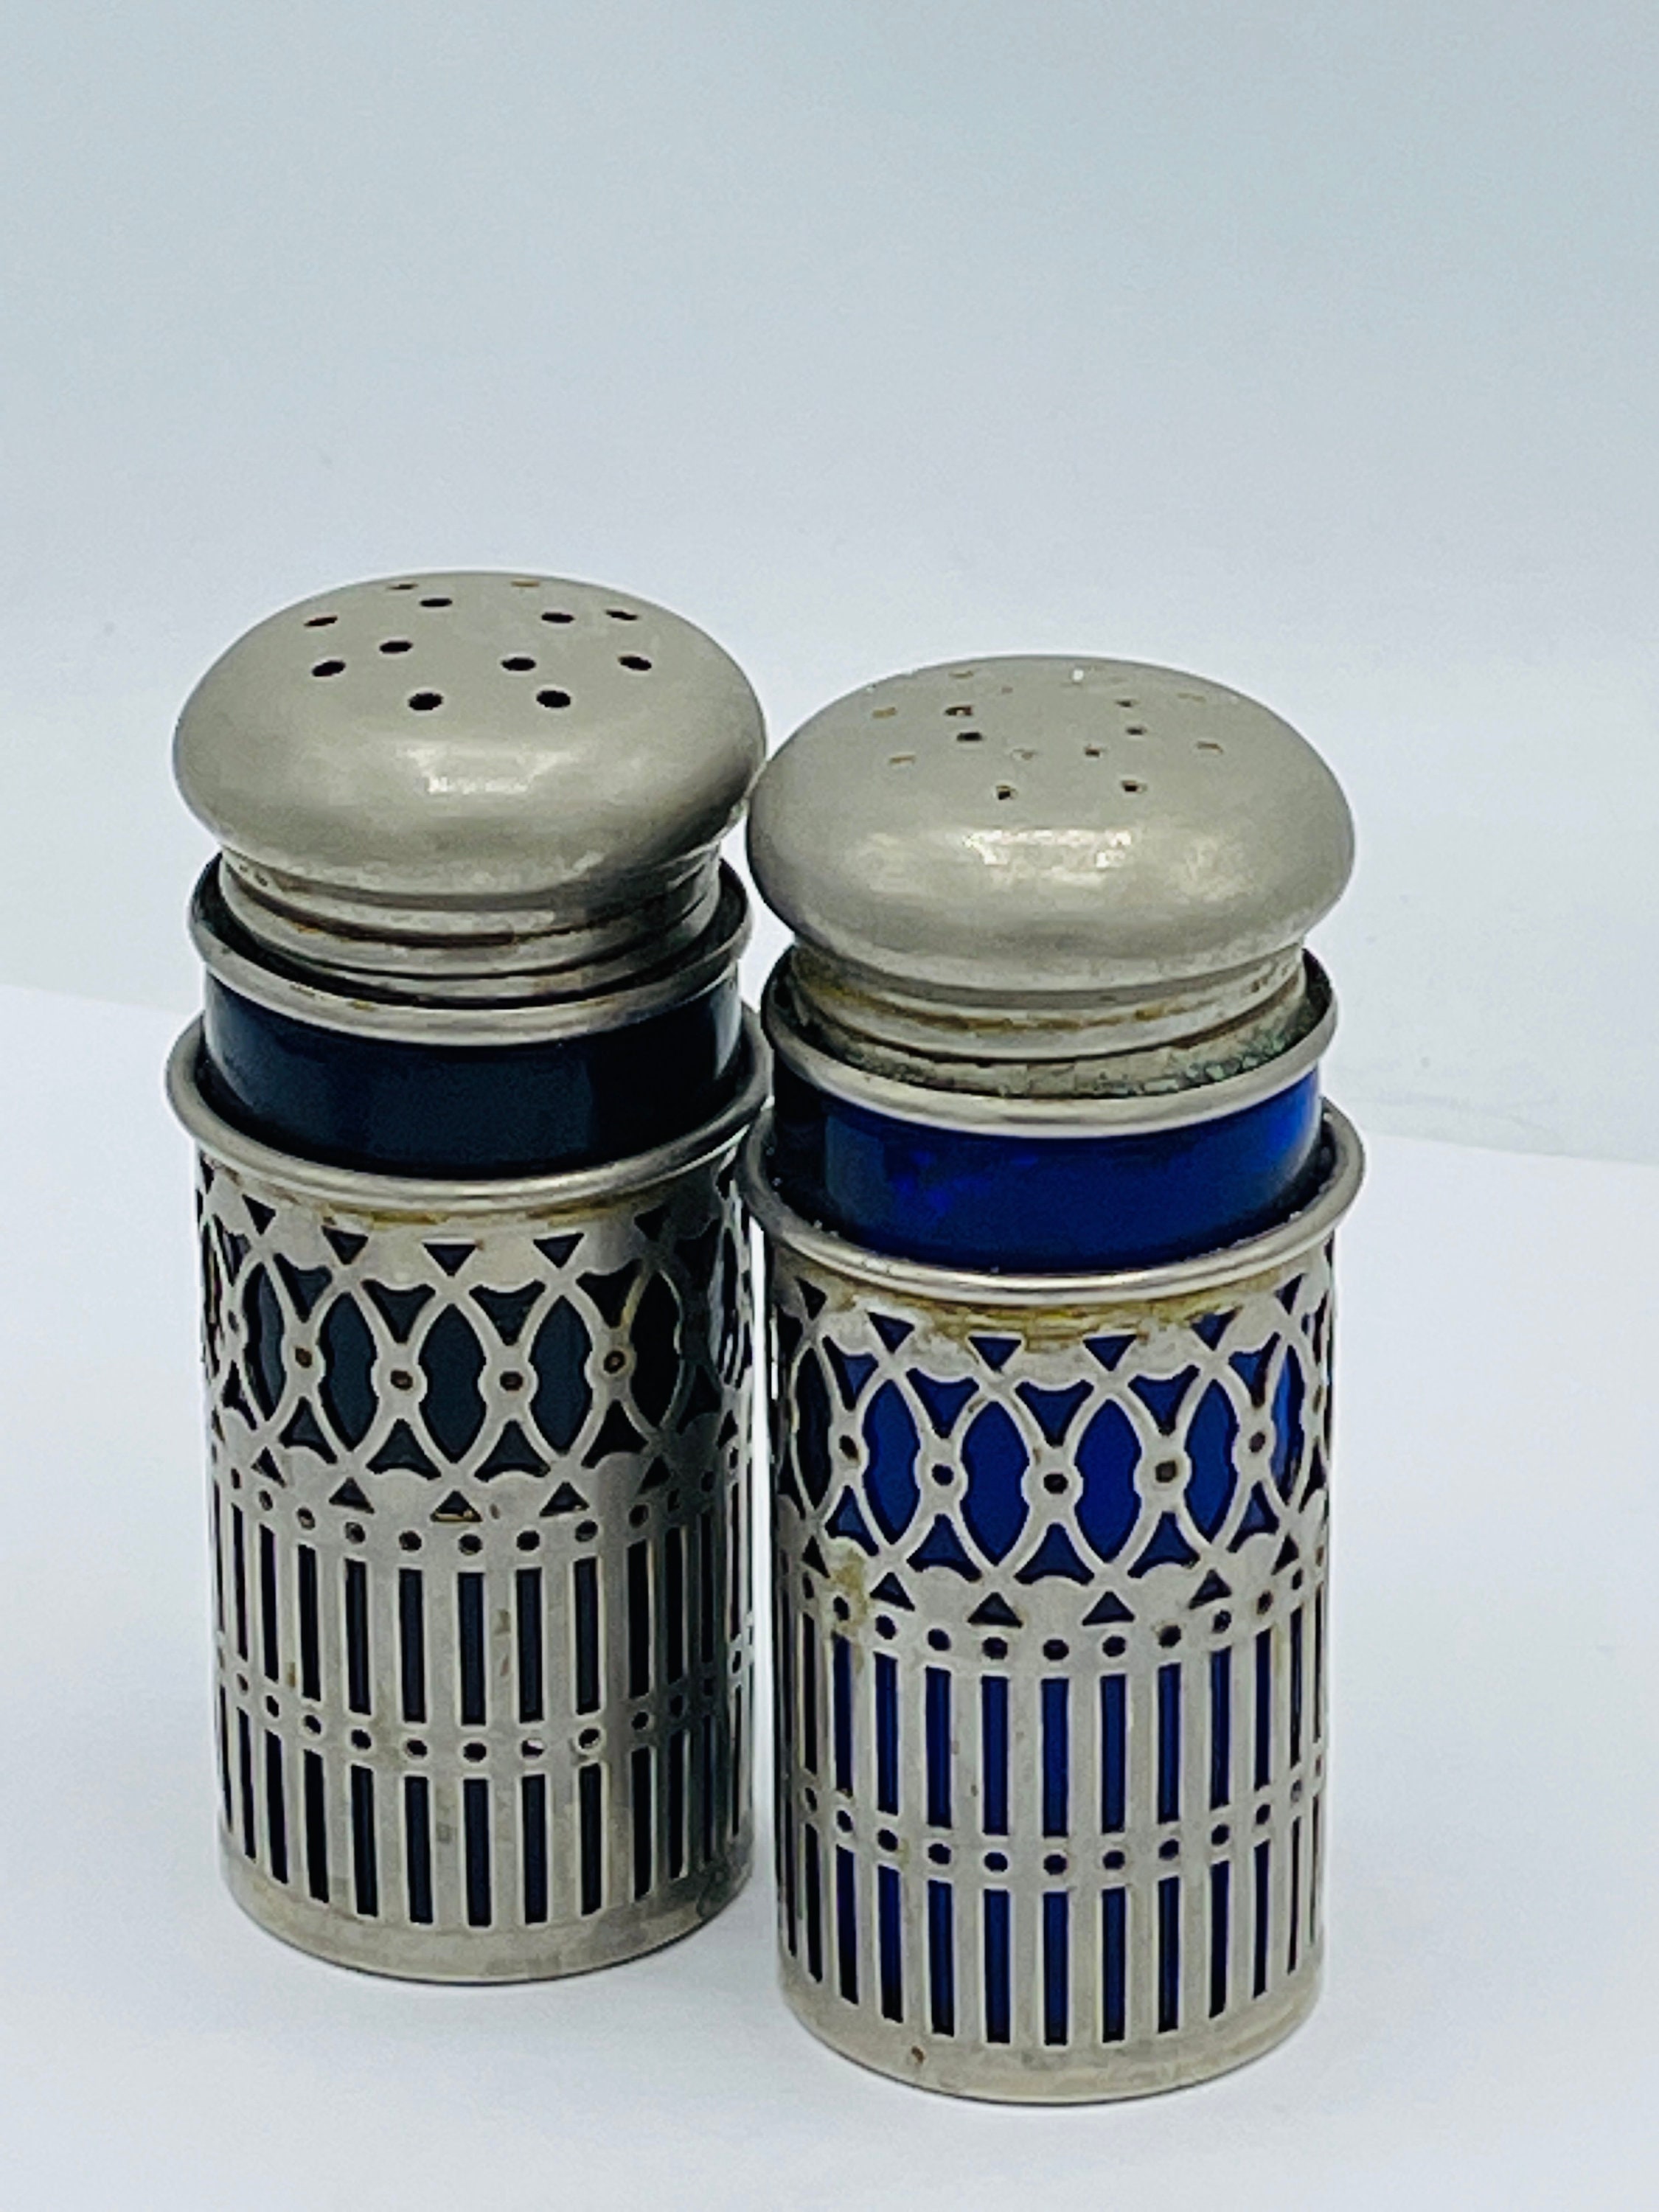 Vintage Pair of Silver Plate and Cobalt Blue Salt & Pepper Shakers